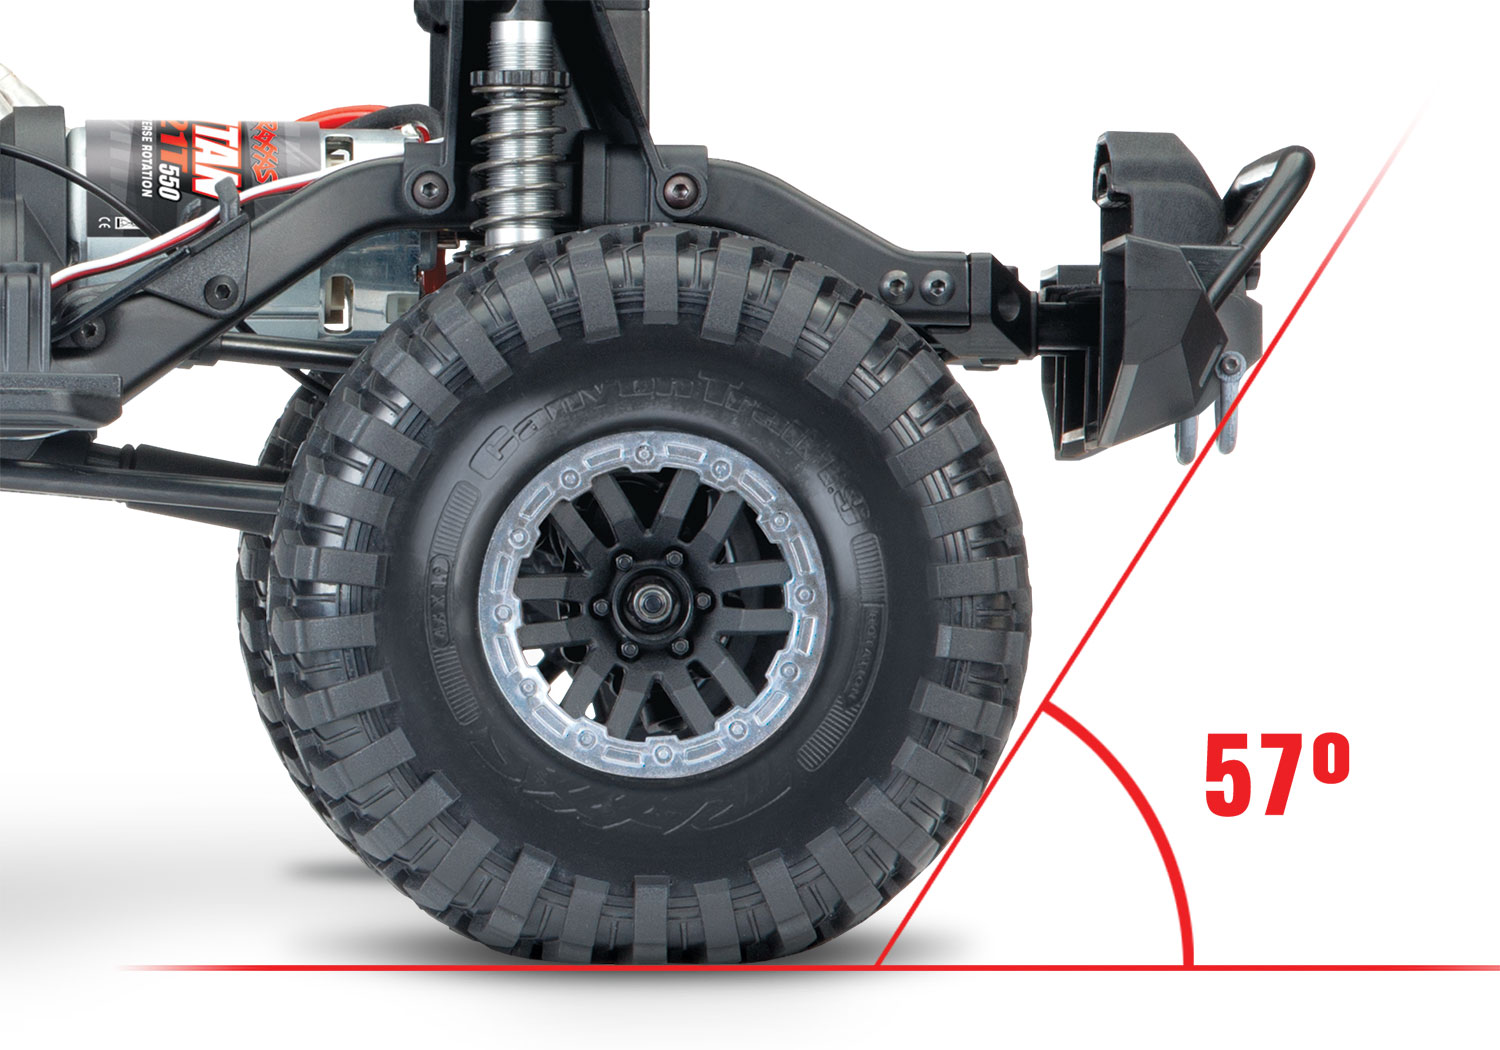 PACK ECO 100% RTR TRX-4 LAND ROVER DEFENDER SABLE LIPO 3S 5000 MAH CHARGEUR TRAXXAS SAC OFFERT